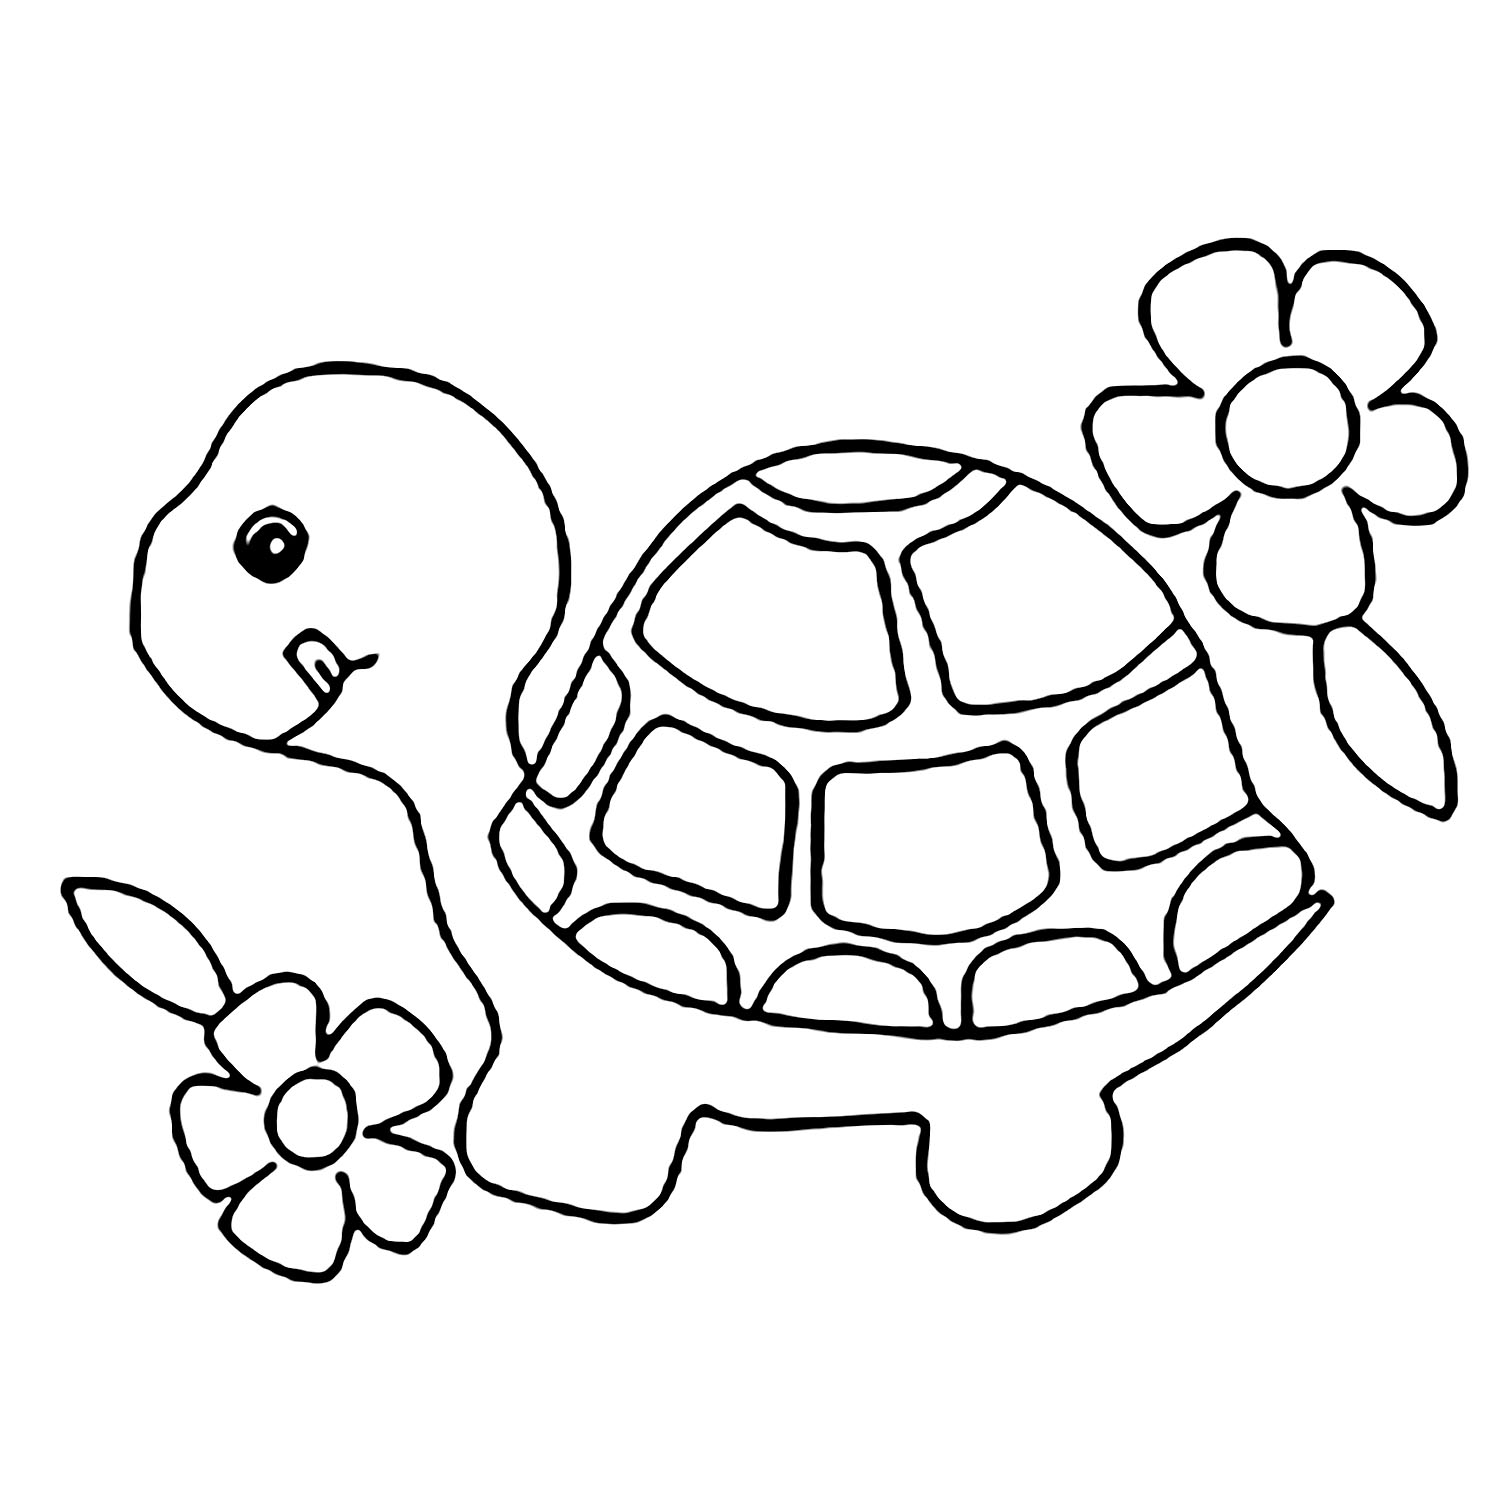 Turtle Coloring Pages For Children - Turtles Kids Coloring Pages